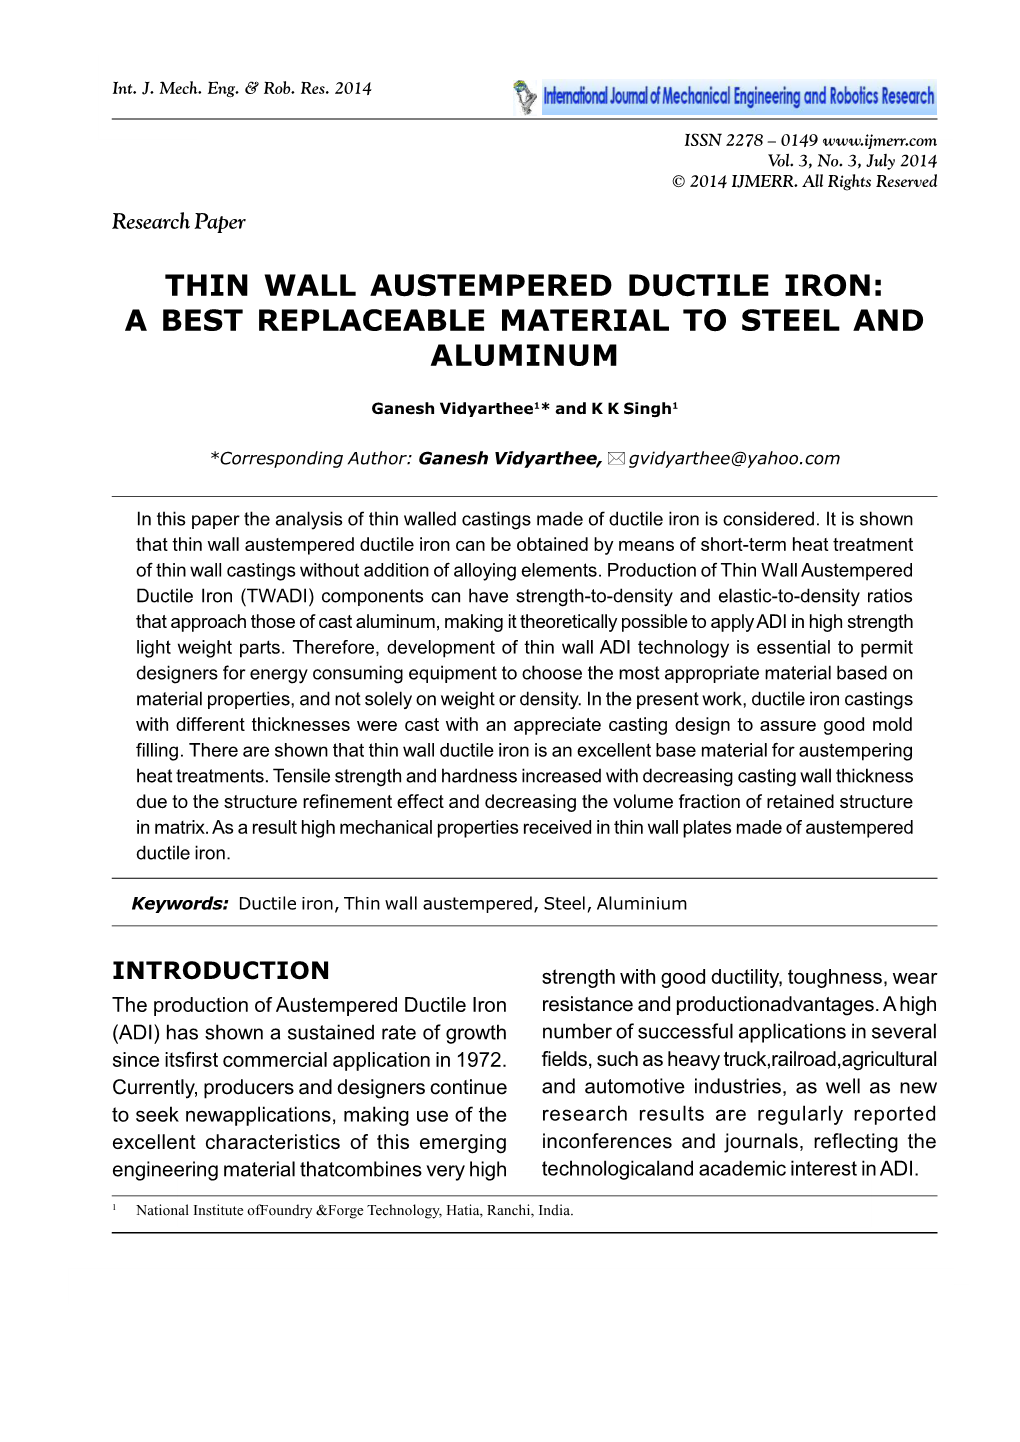 Thin Wall Austempered Ductile Iron: a Best Replaceable Material to Steel and Aluminum